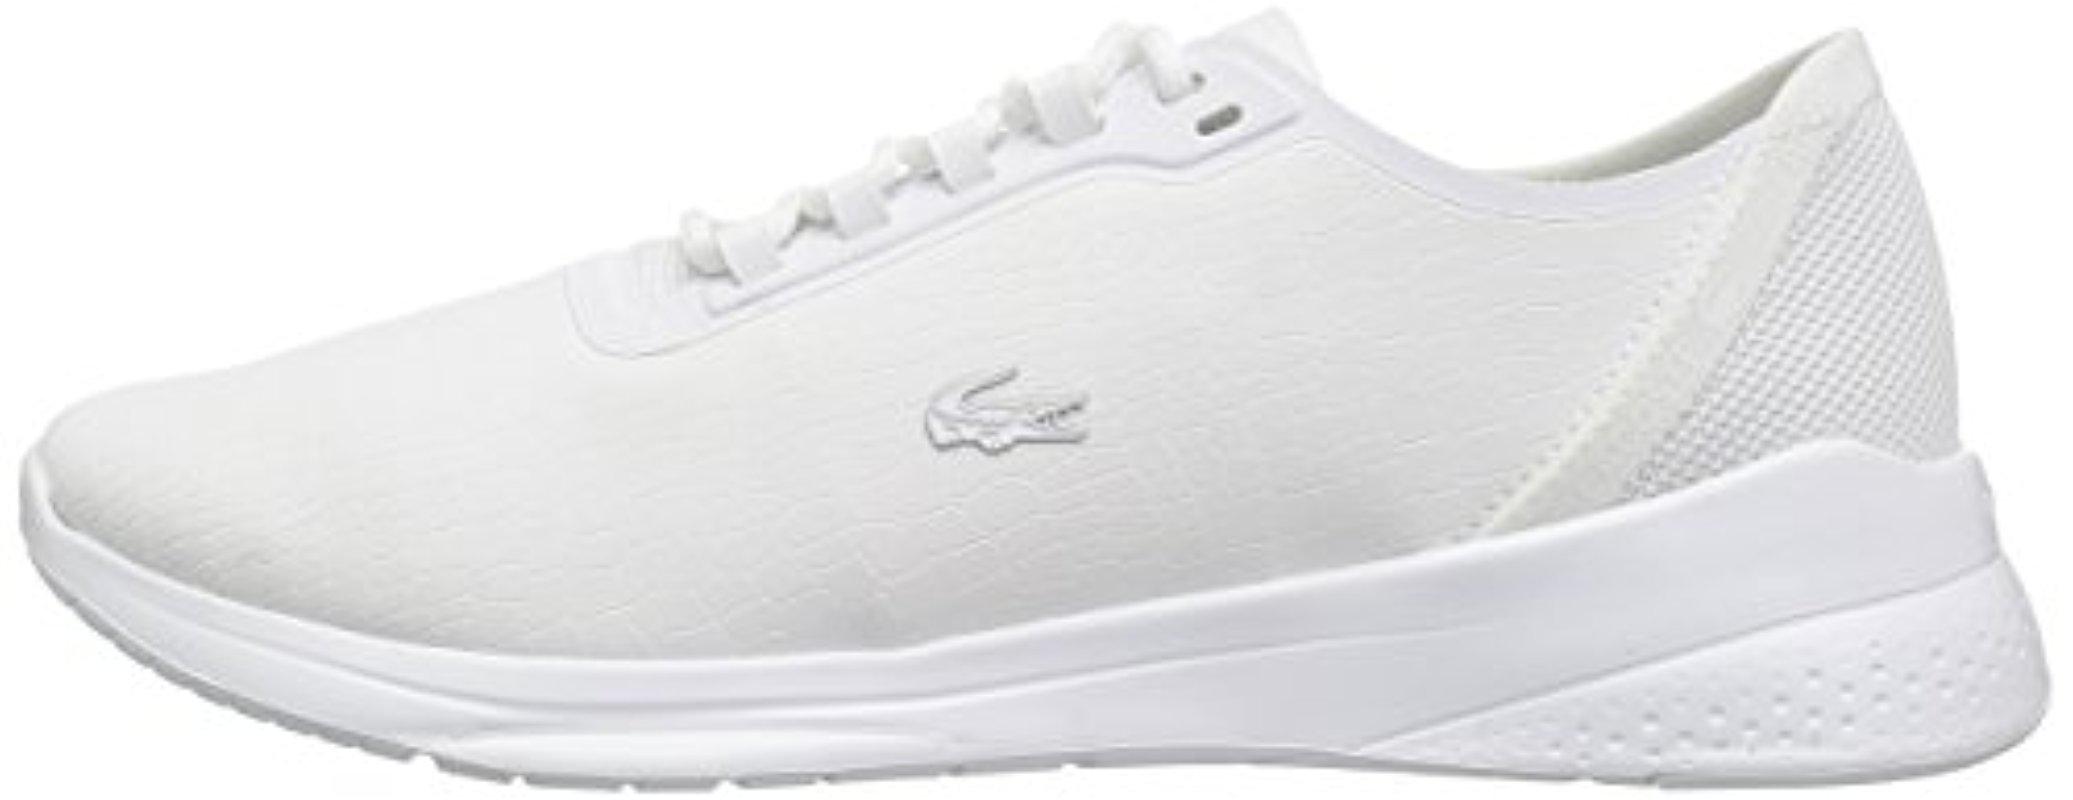 lacoste lt fit 118 white,OFF 55%,aysultancandy.com